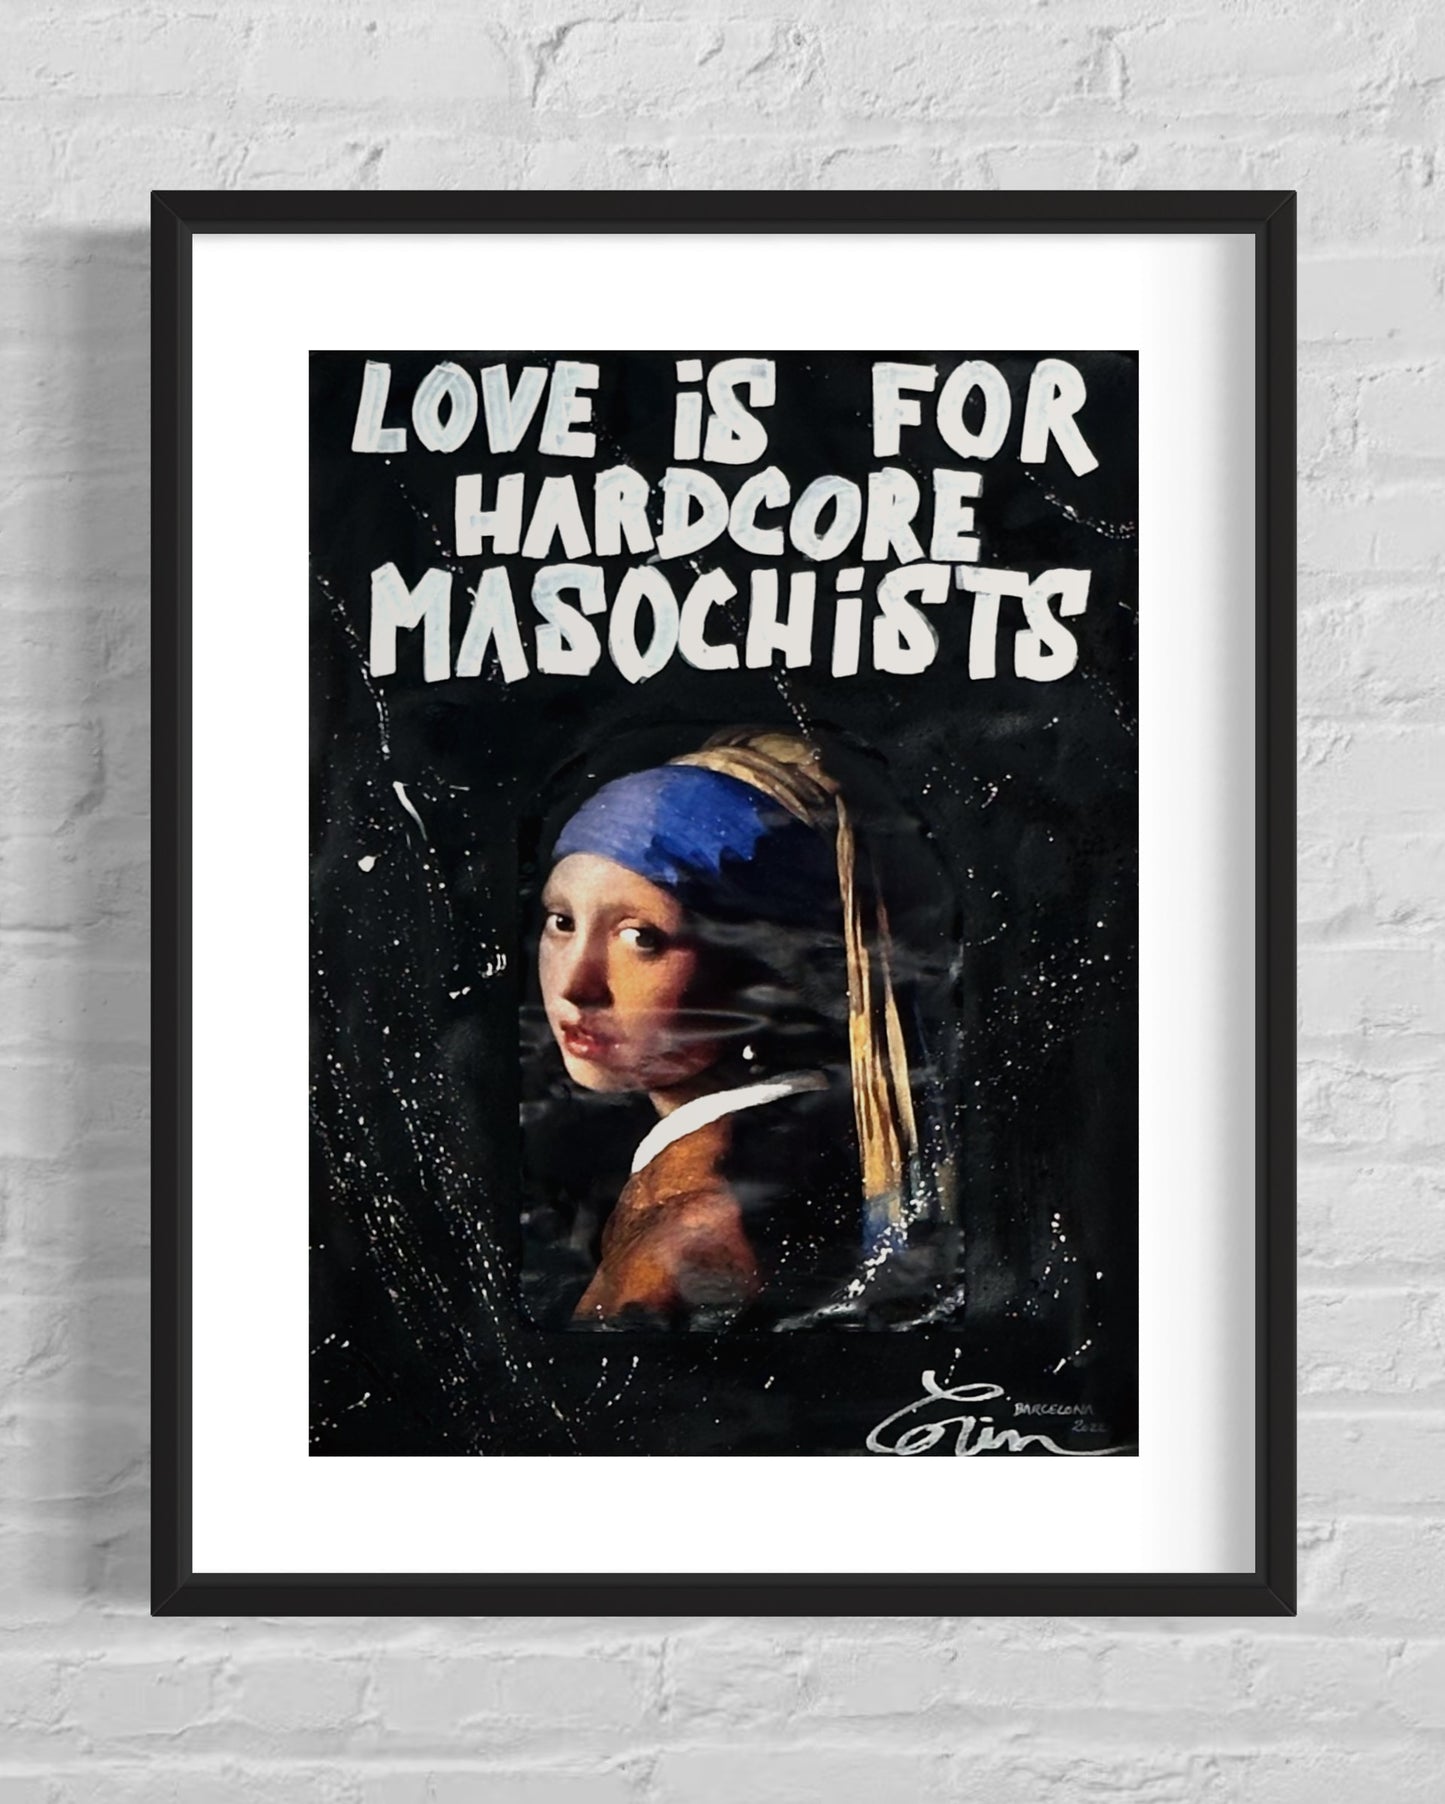 LOVE IS FOR HARDCORE MASOCHISTS - PEARL